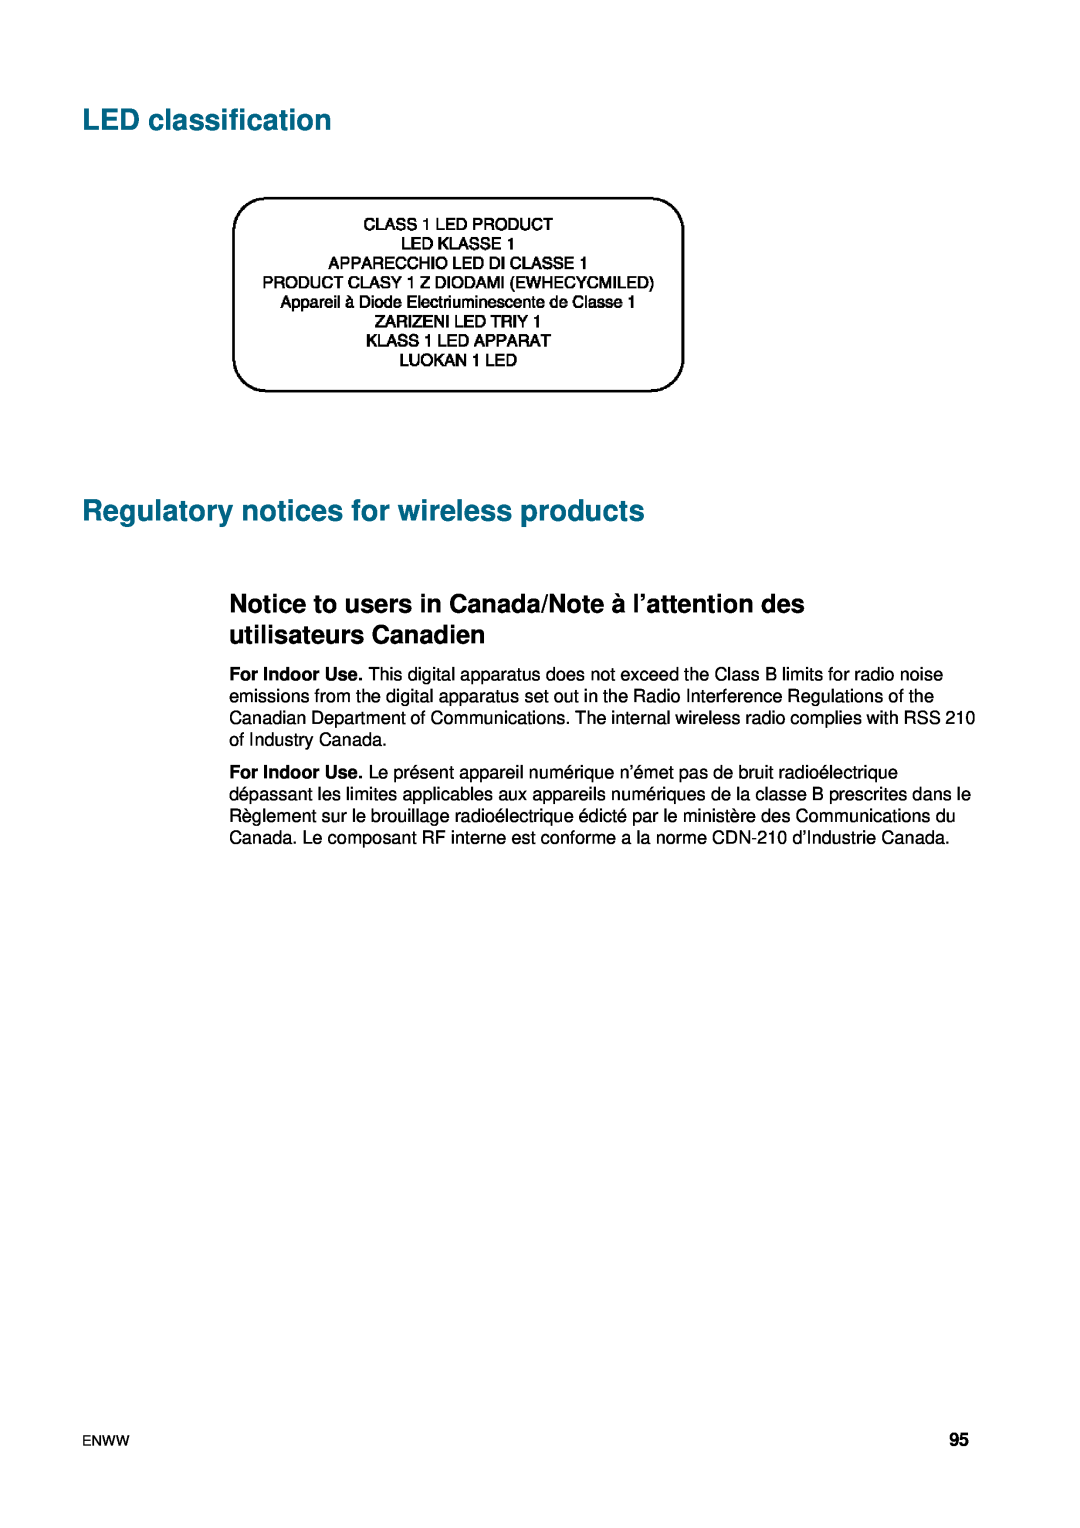 HP 1200 manual LED classification Regulatory notices for wireless products 